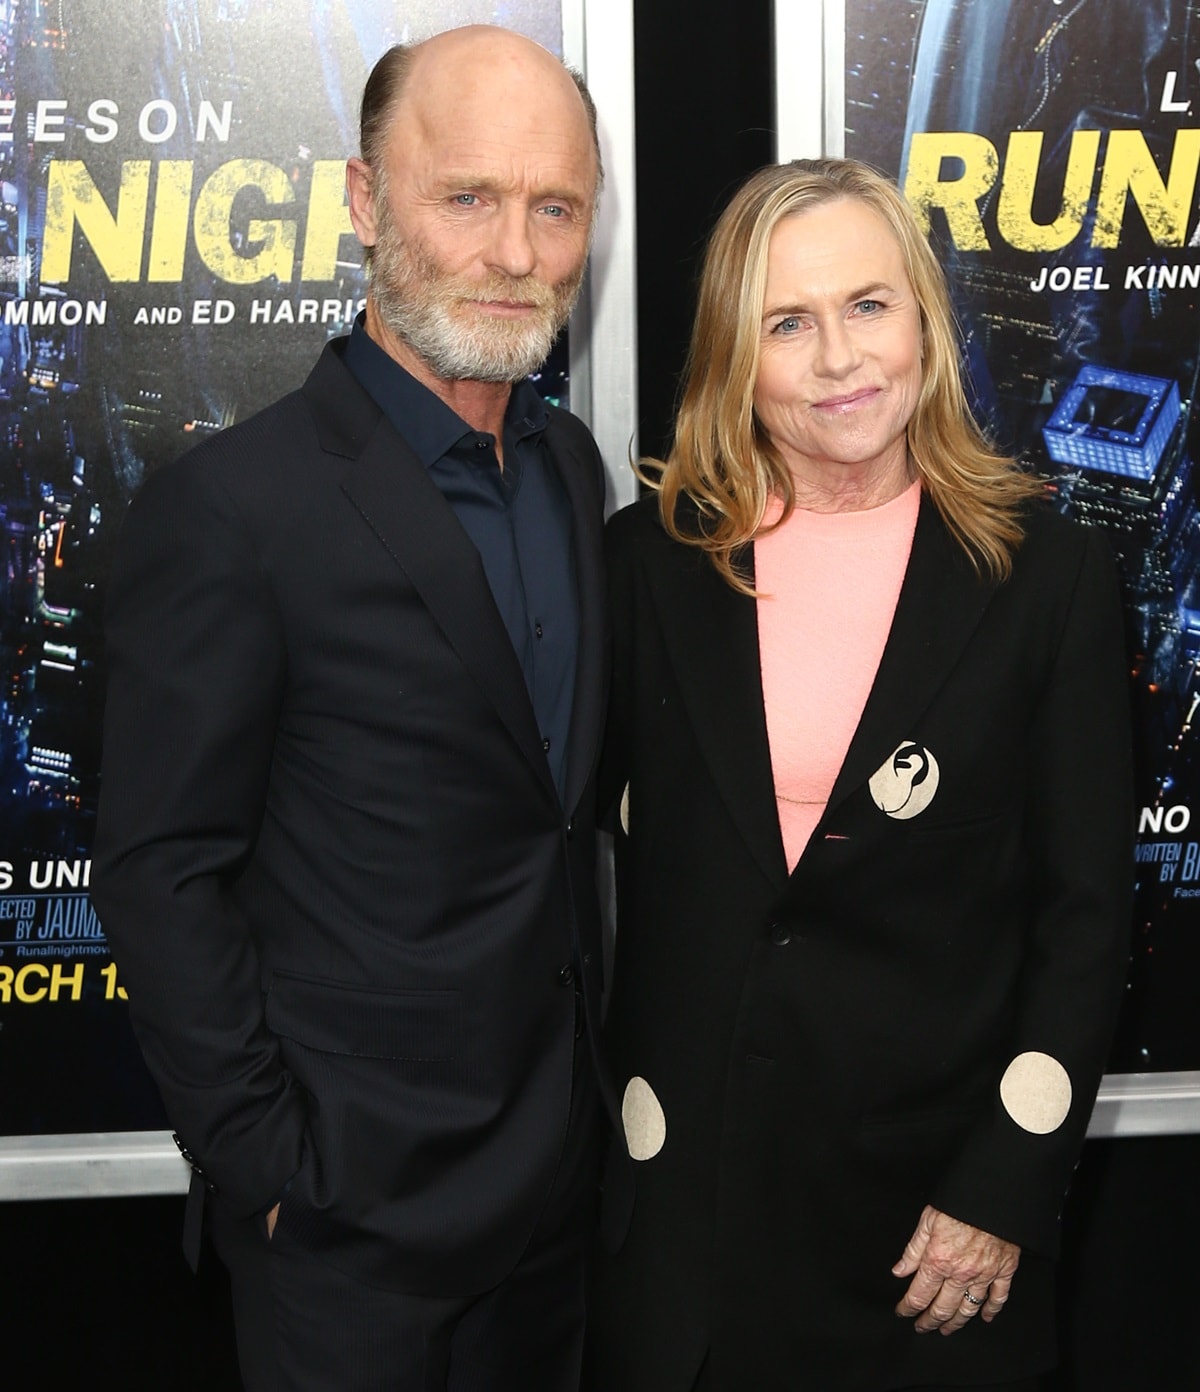 Amy Madigan and Ed Harris met in 1981 while performing in a play called The Jacksonian, got married the following year and have been together ever since